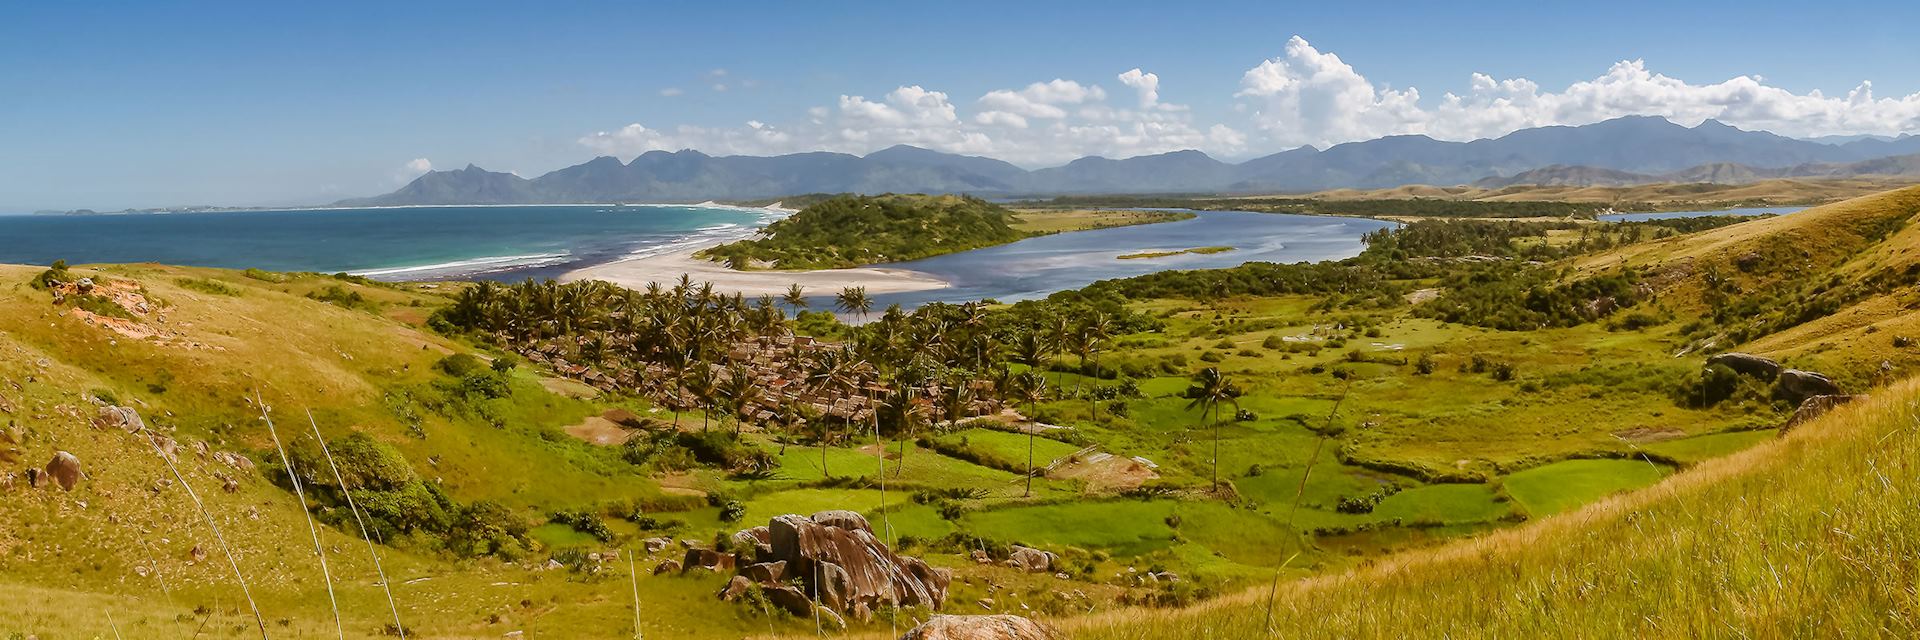 https://media.audleytravel.com/-/media/images/home/africa/madagascar/places/istock920597134_fortdauphin_800x2400.jpg?q=79&w=1920&h=640